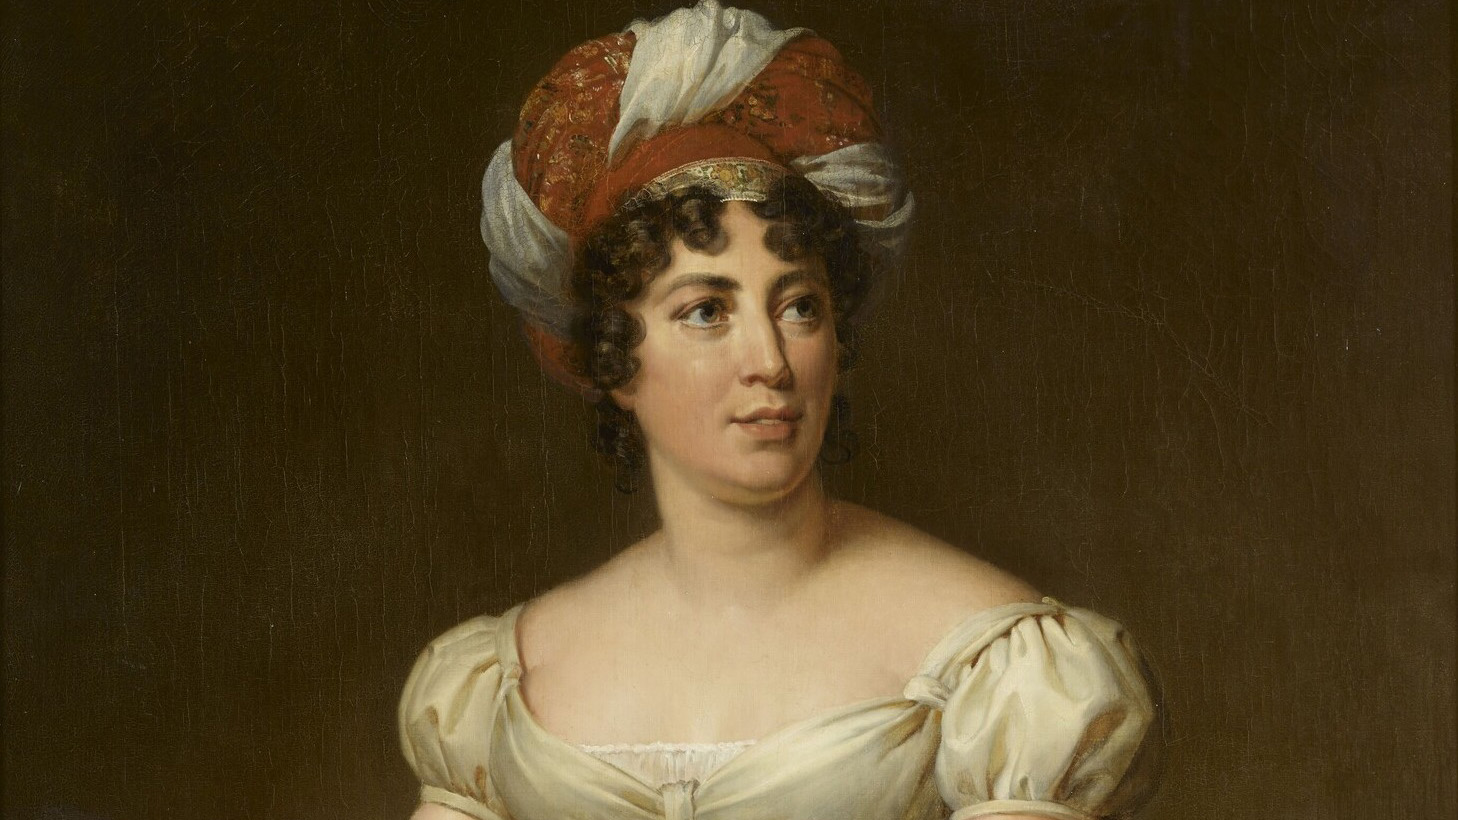 A detail of an oil portait of Germaine de Staël wearing a red and white turban.